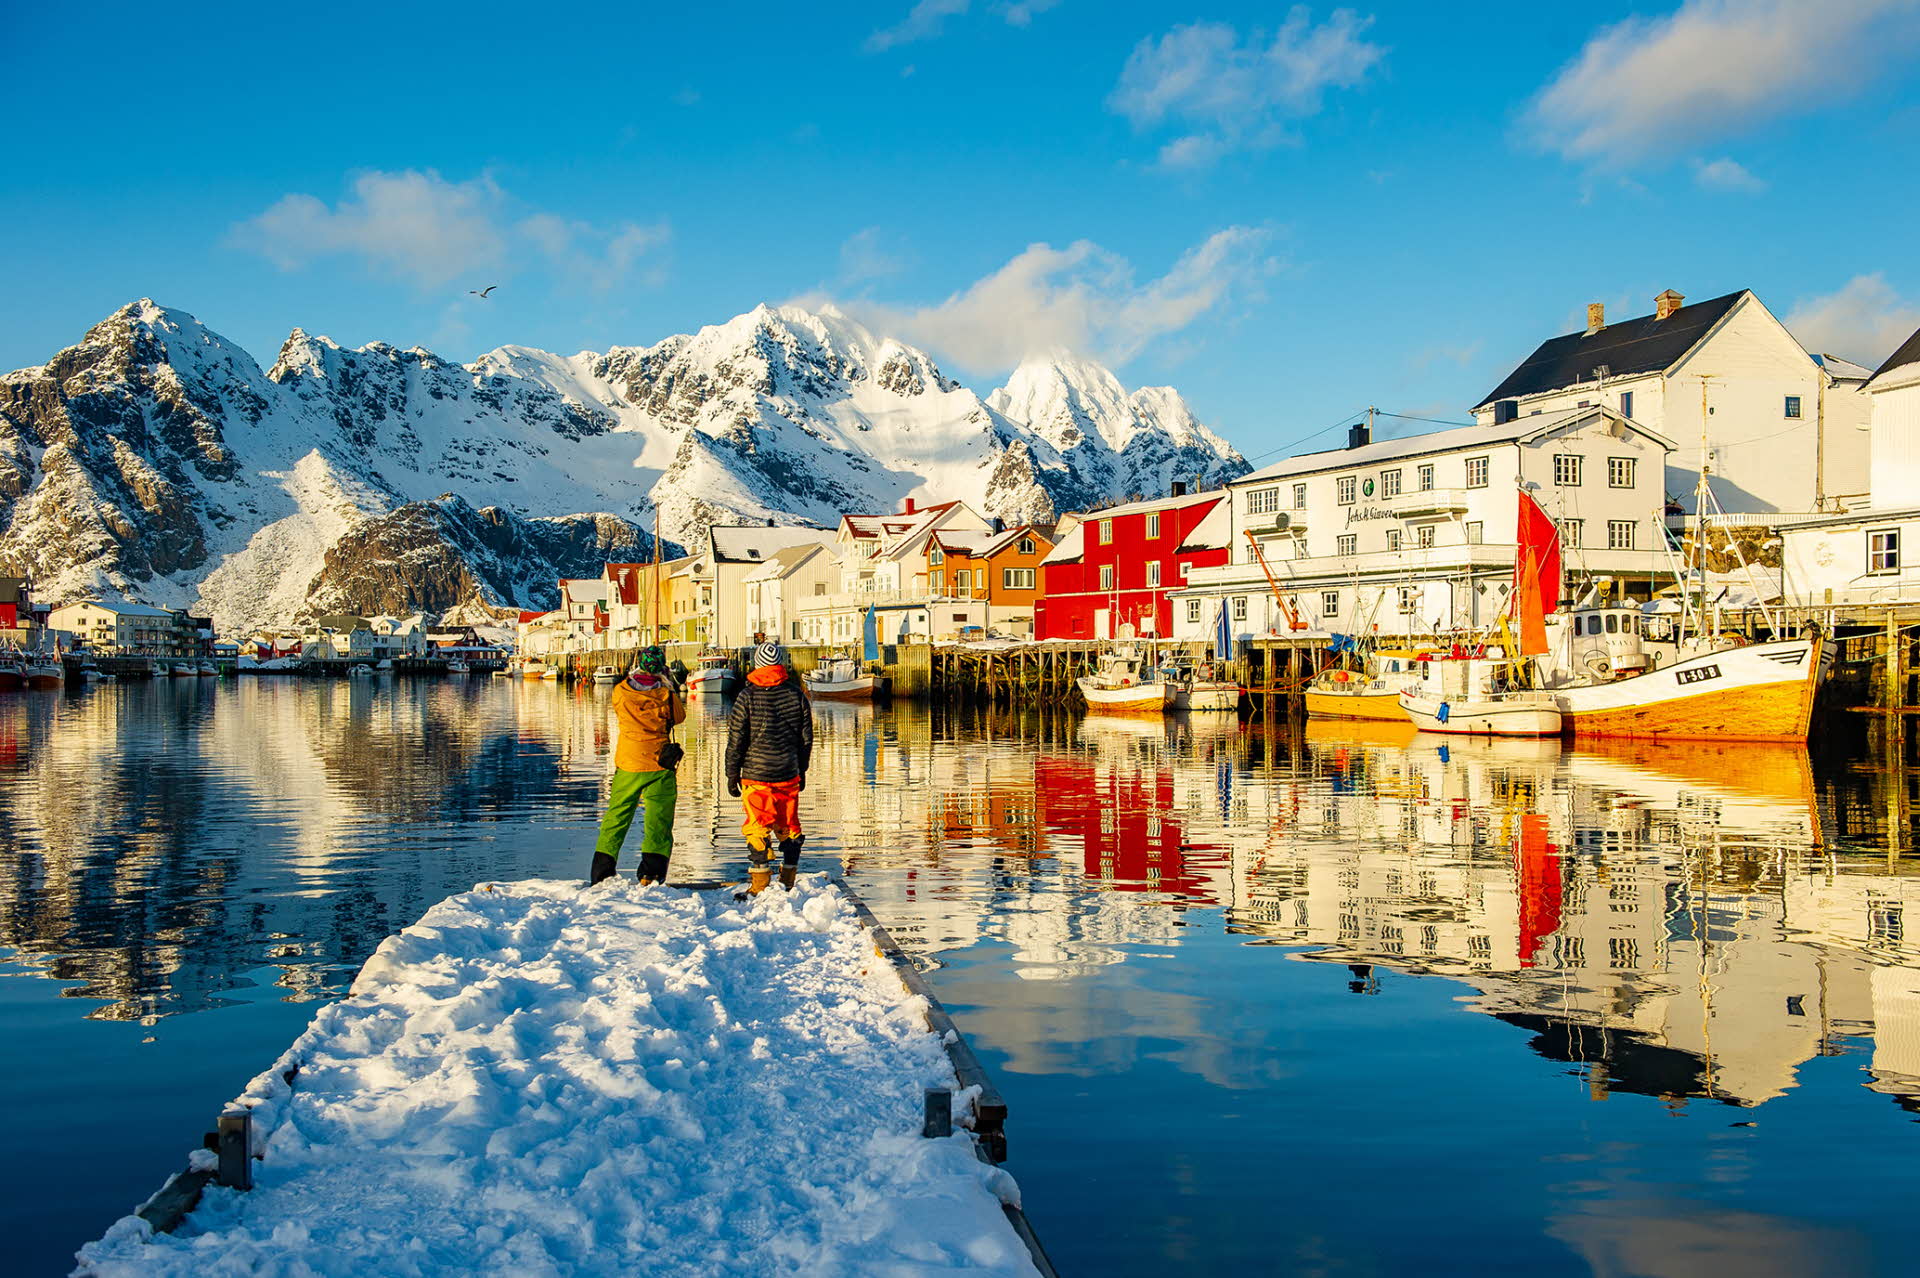 Two men standing on a quay in winter dress looking at a Lofoten Island village. Snowy mountains in the foreground.